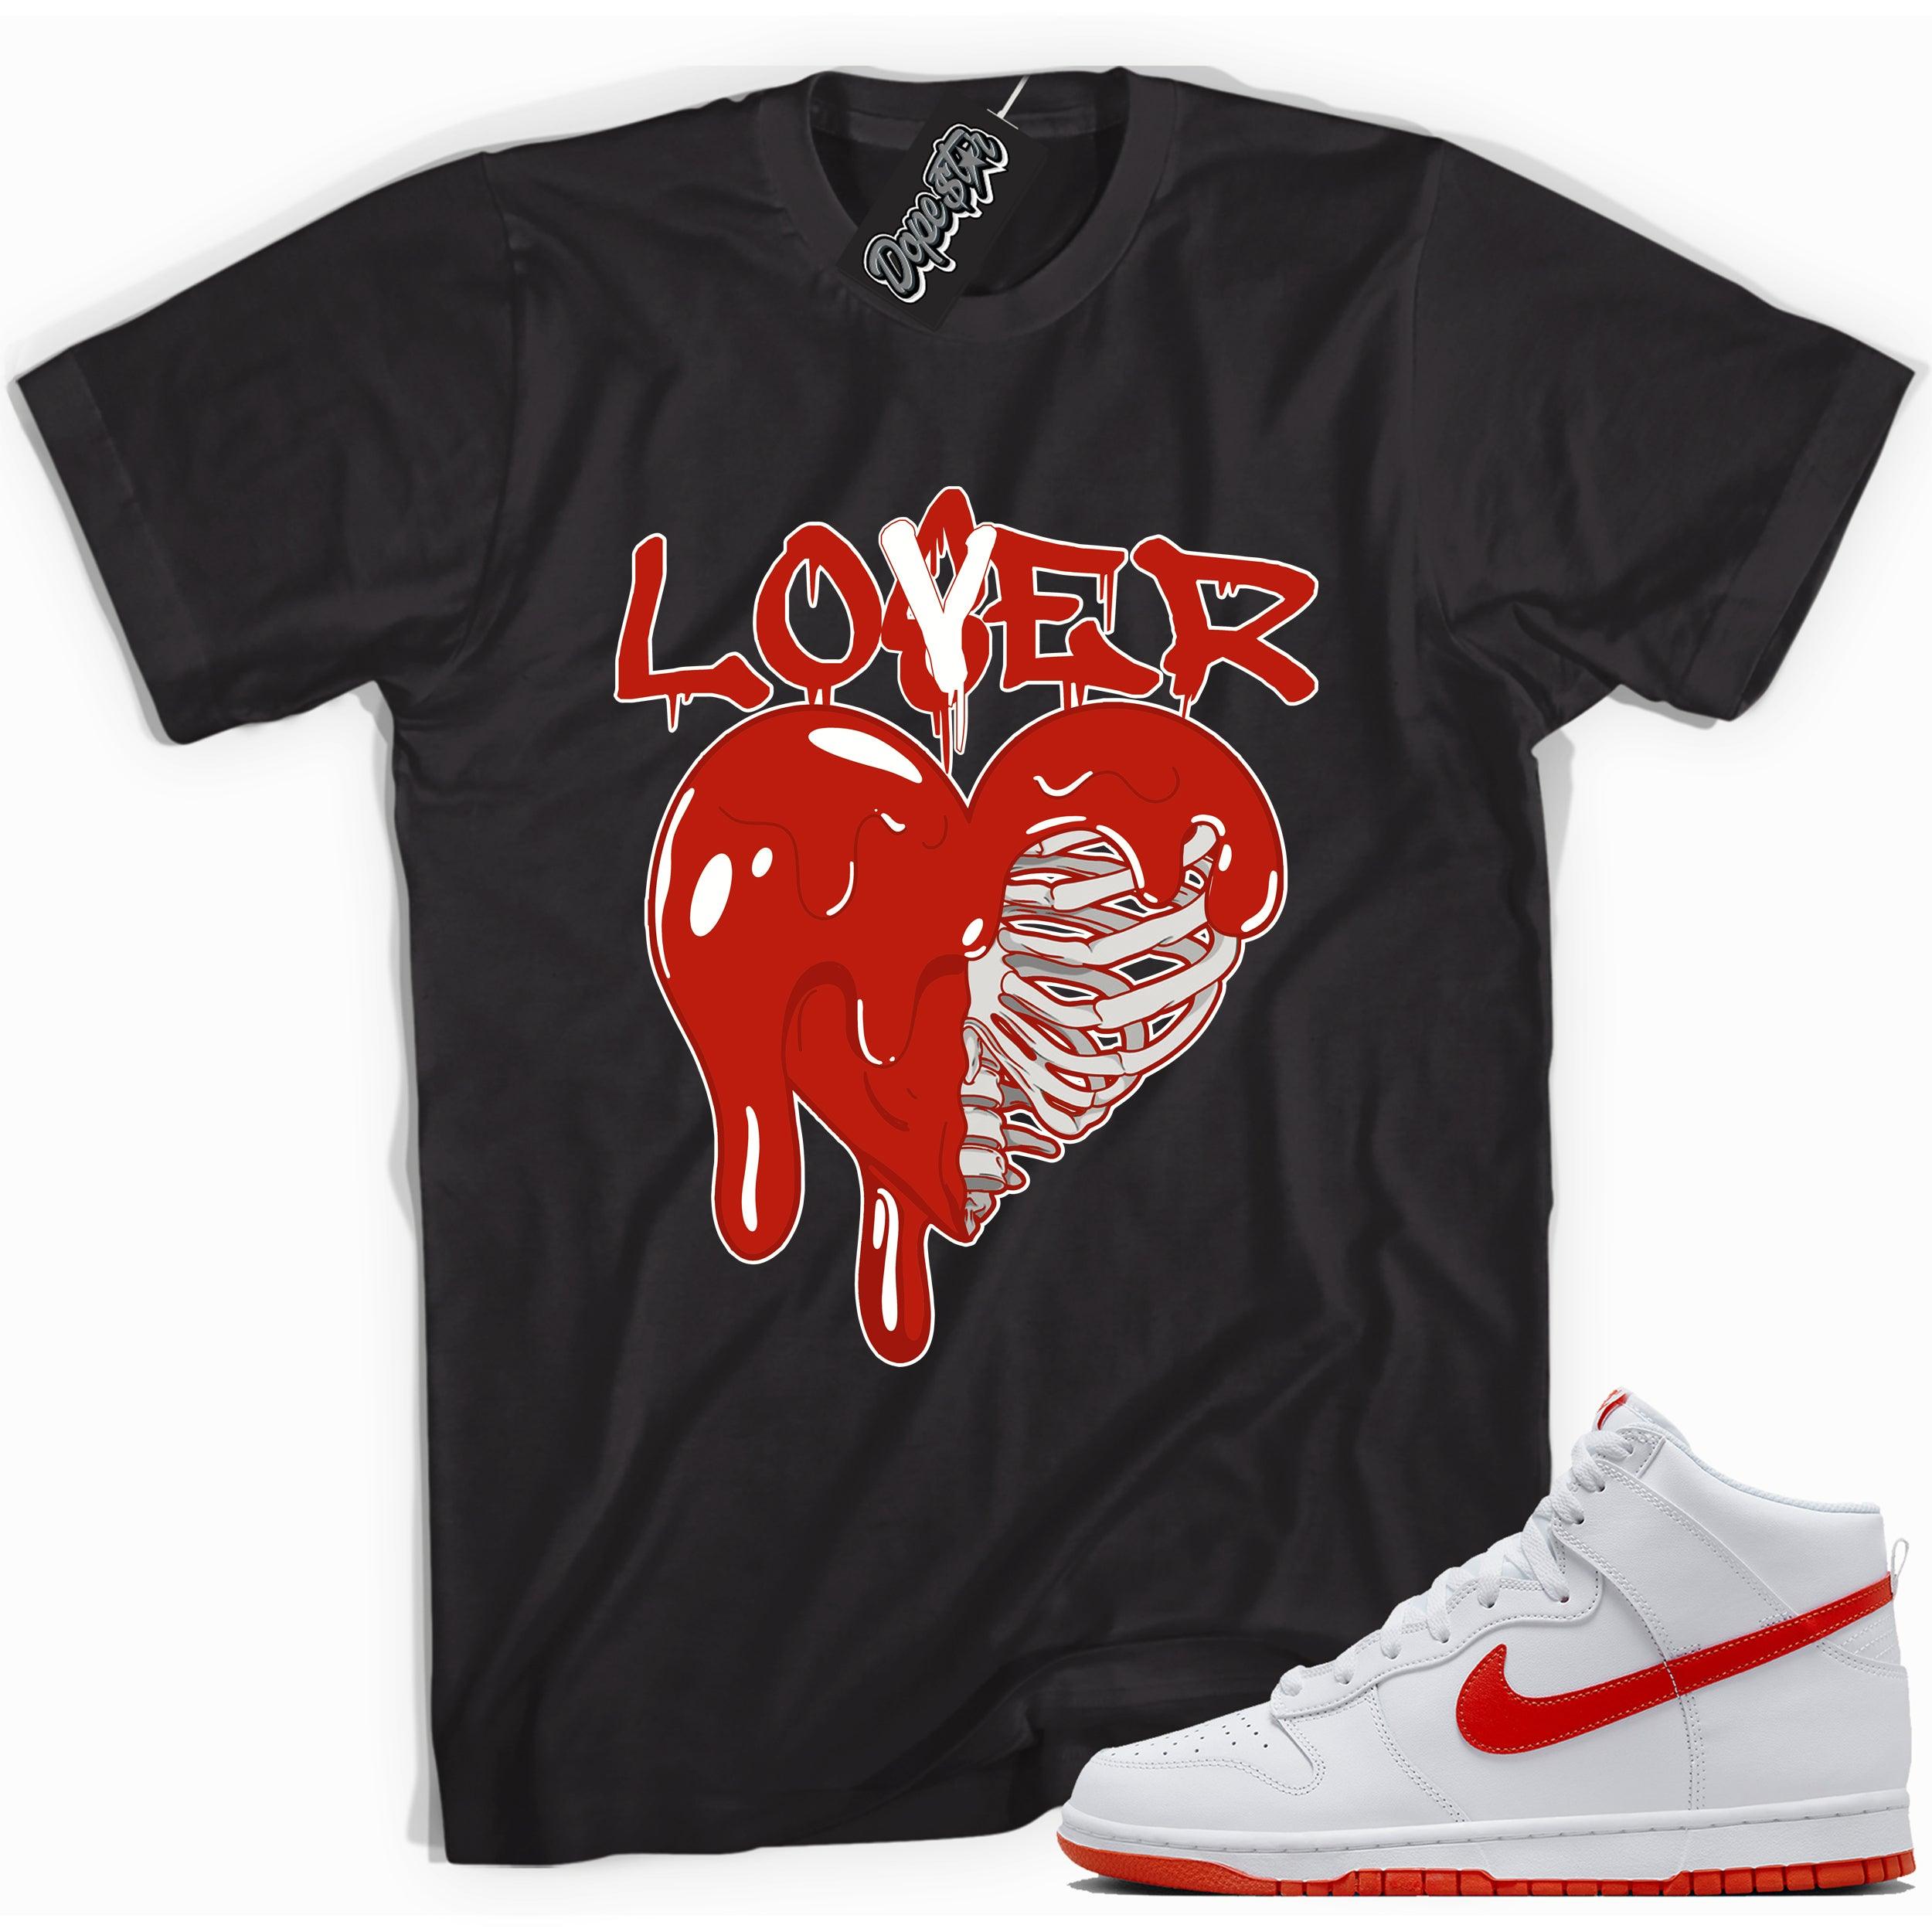 Cool black graphic tee with 'lover loser' print, that perfectly matches Nike Dunk High White Picante Red sneakers.